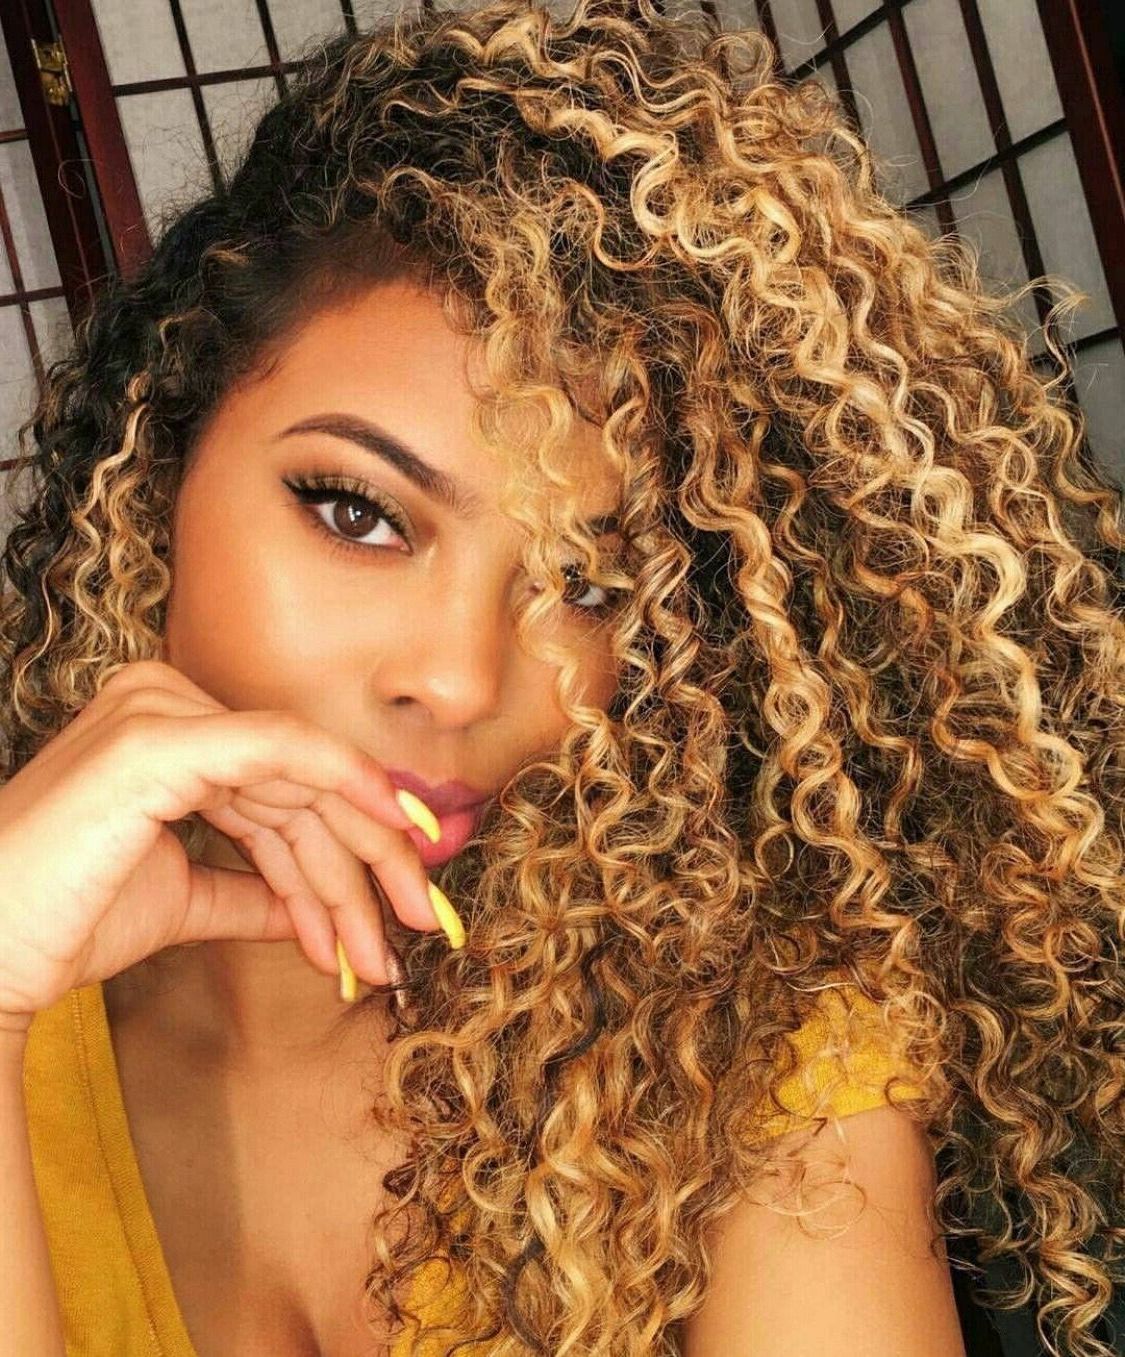 Diggin The Nails With The Hair | Hair Color In 2019 | Blonde Within Curls And Blonde Highlights Hairstyles (View 6 of 20)